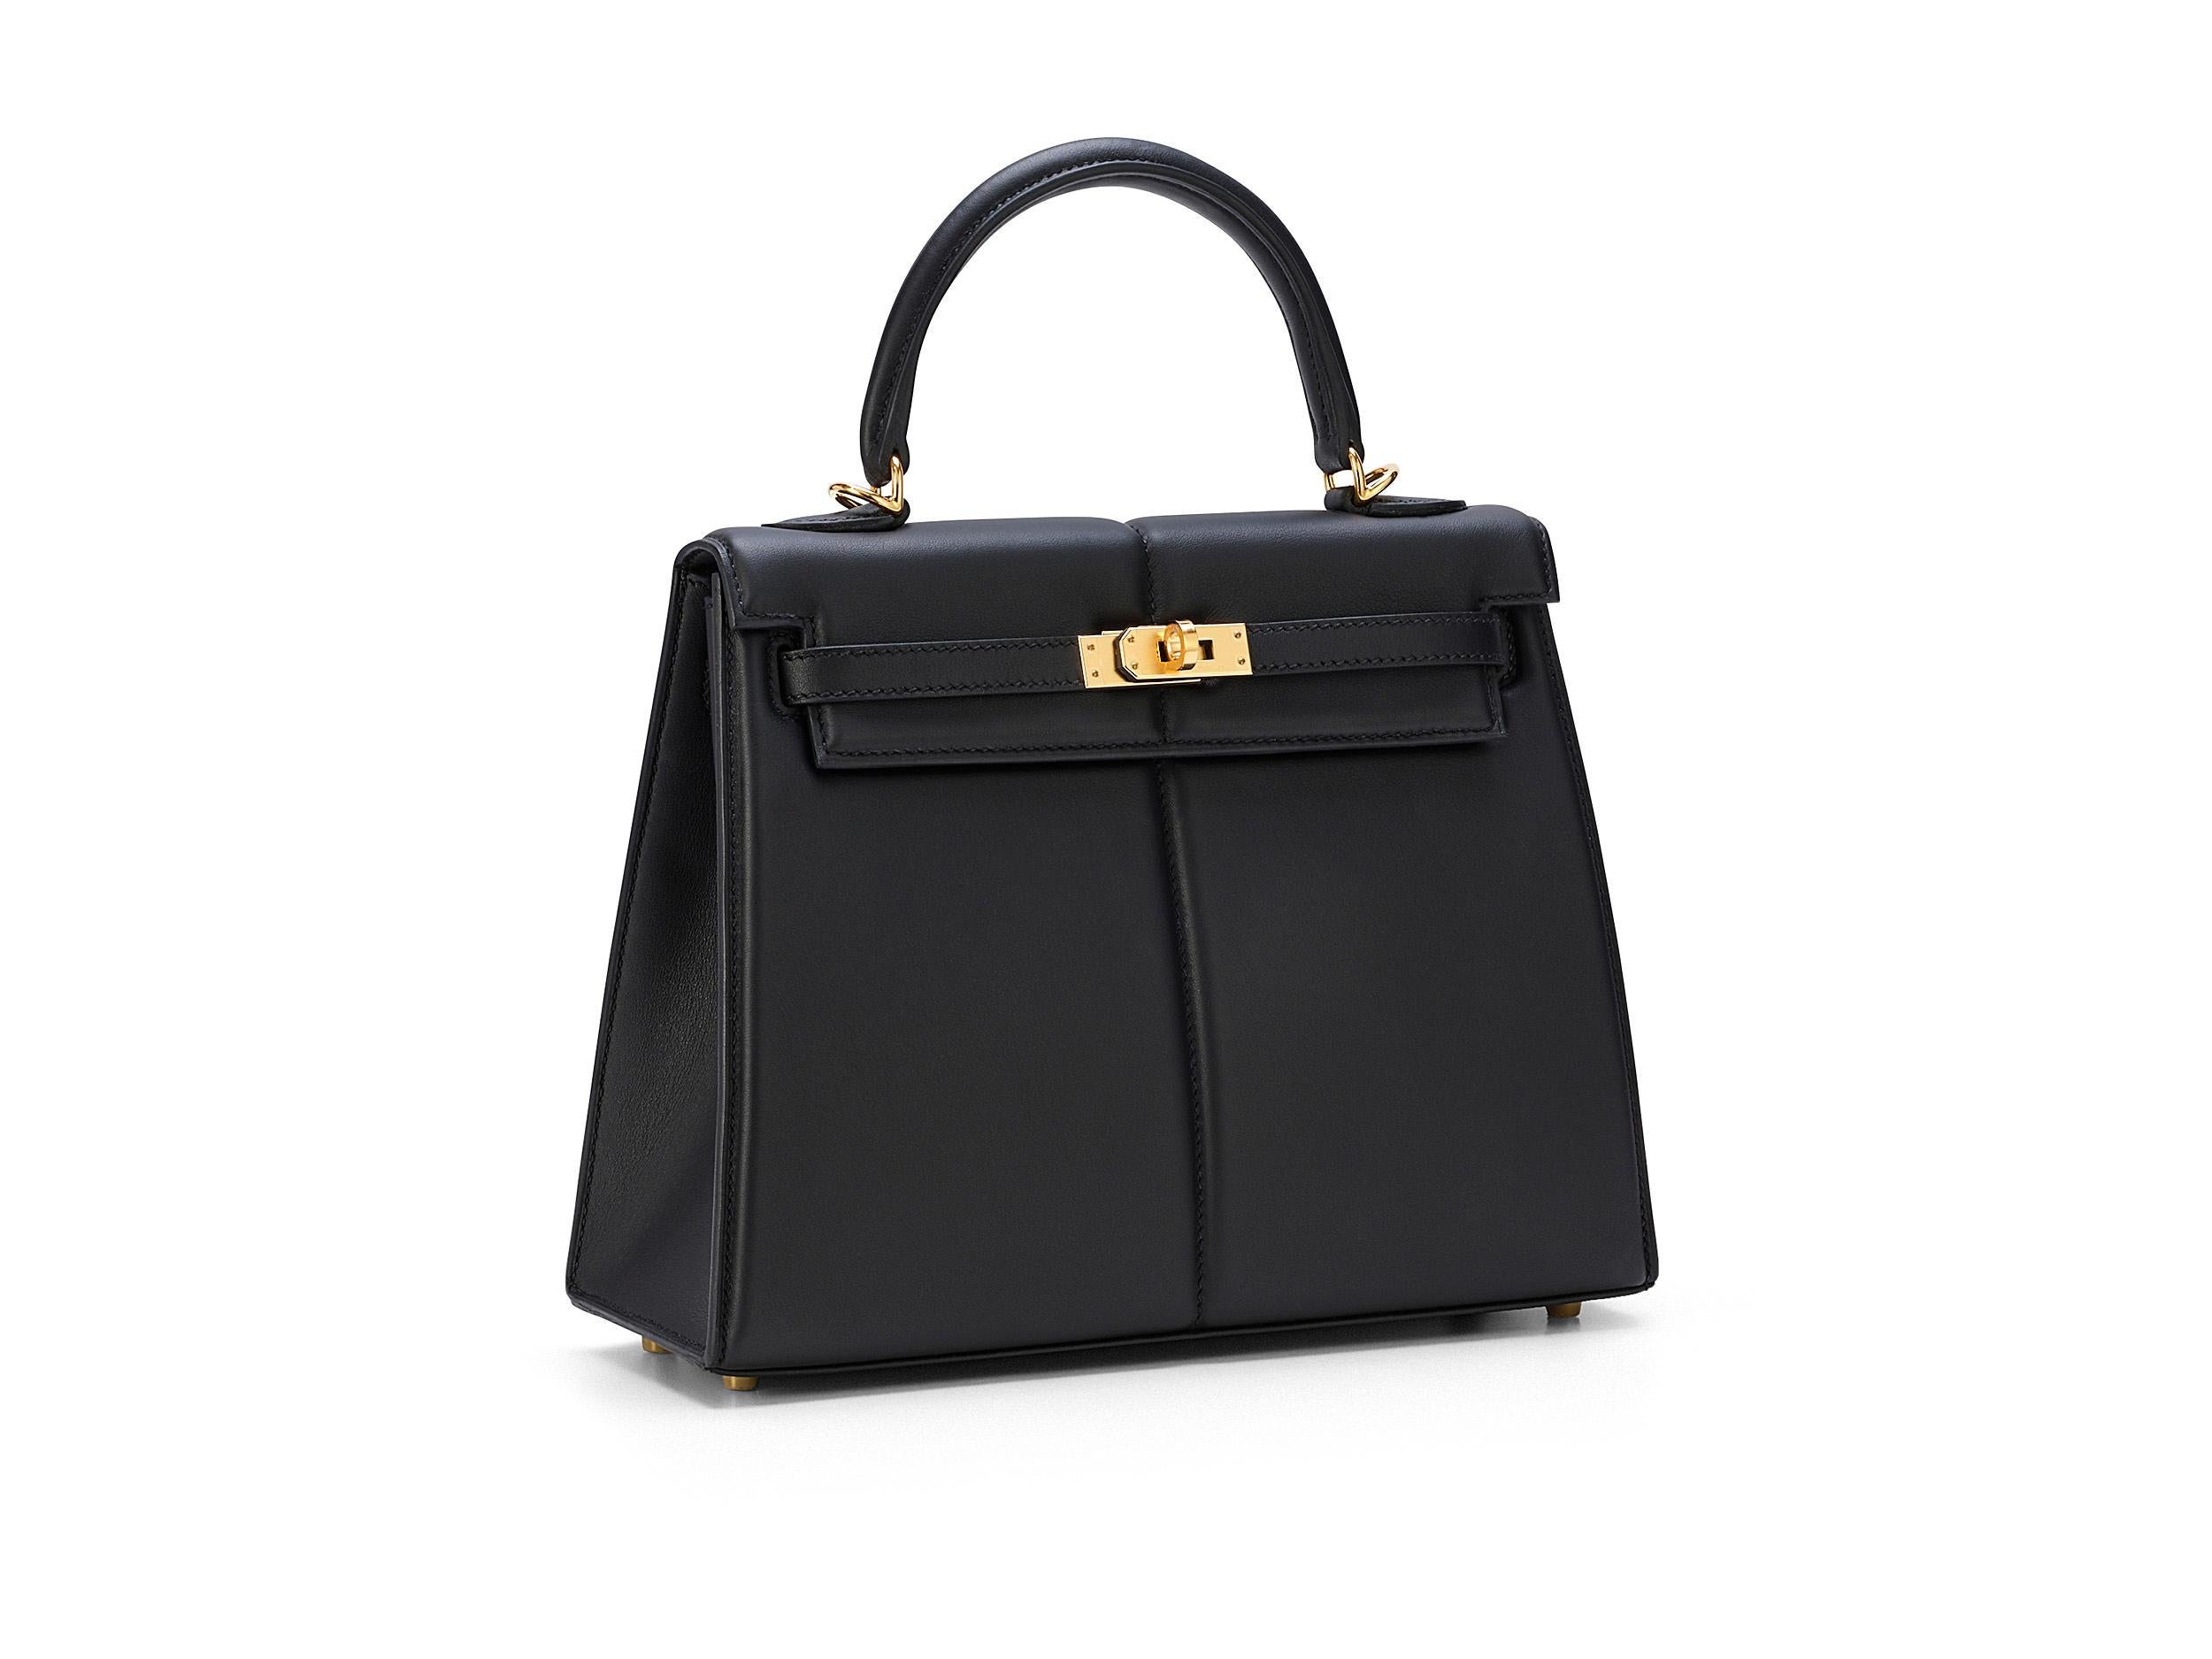 Hermès Kelly Padded 25 in noir and swift leather with gold hardware. The bag is unworn and comes as full set including the original receipt.  

Stamp U (2022) 

